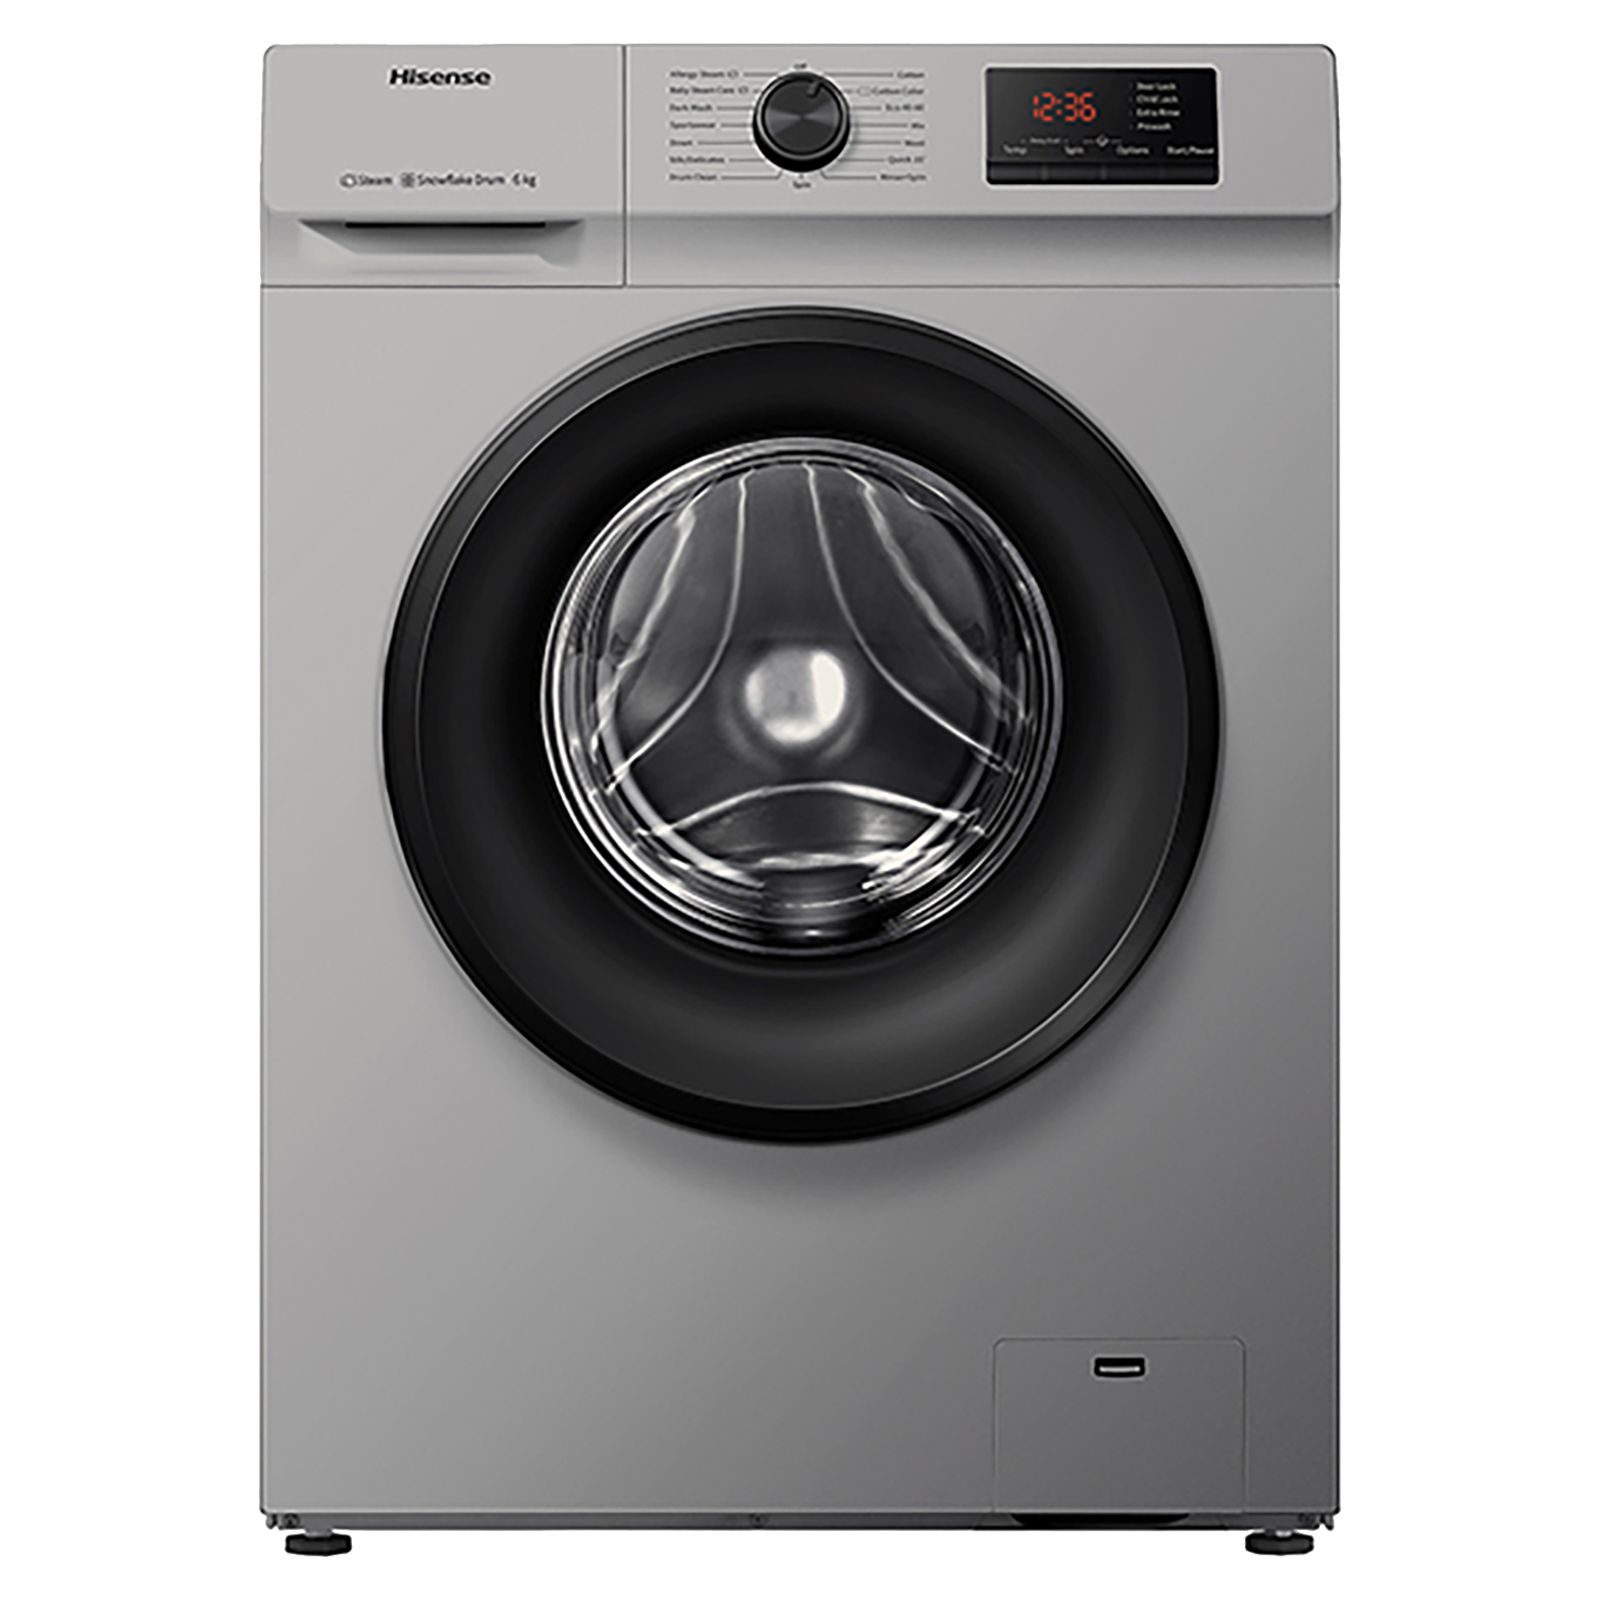 Hisense Simple Life 6 Kg Fully Automatic Front Load Washing Machine (Automatic Fault Finder, WFVB6010MS, Silver)_1